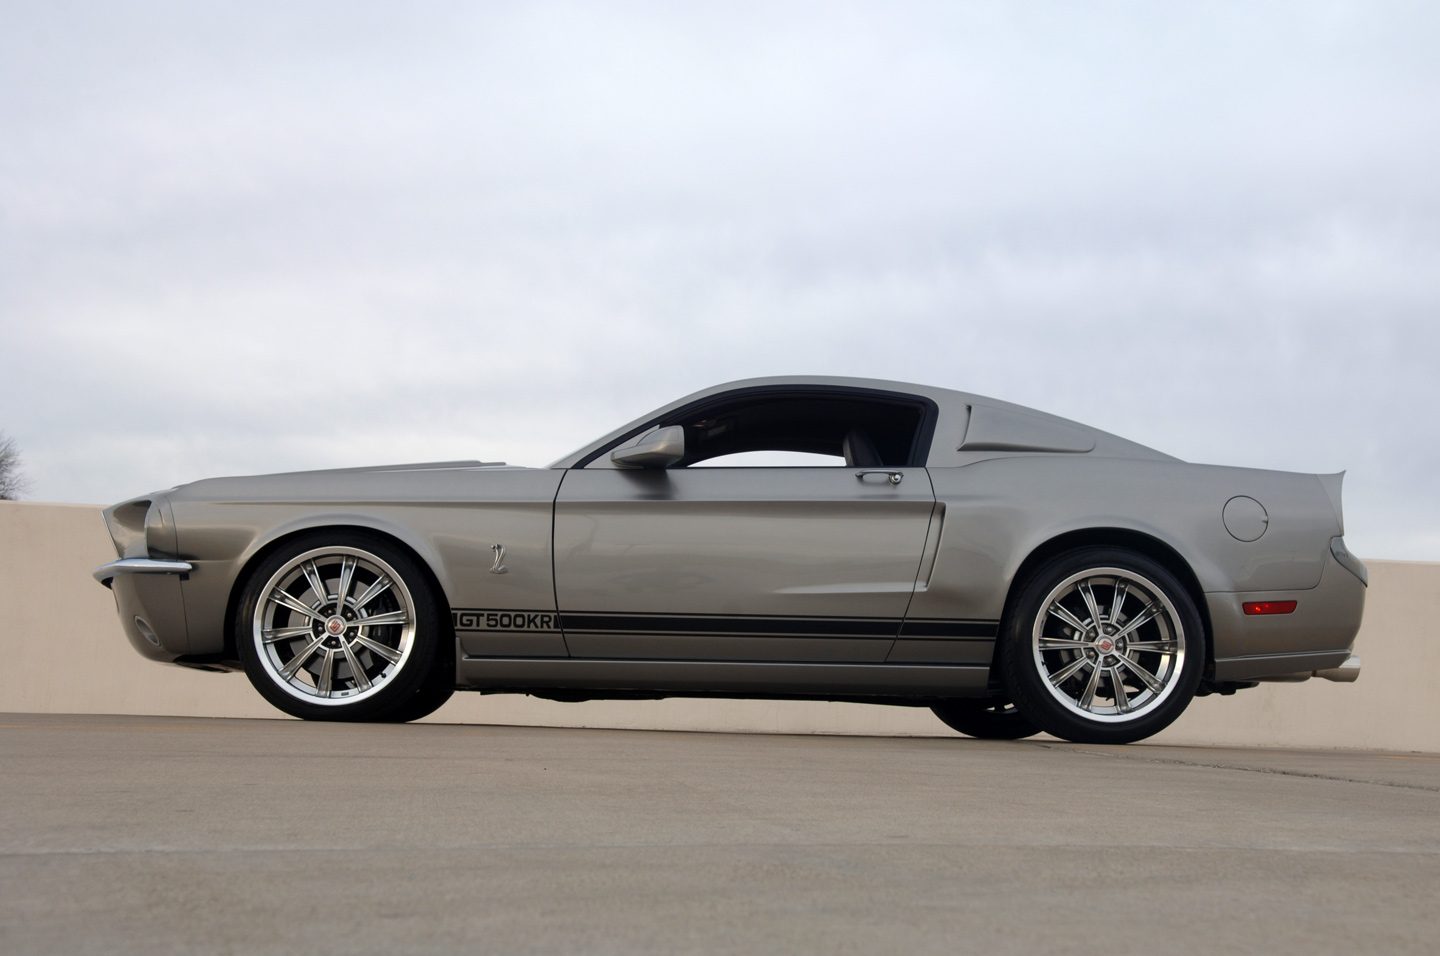 49446d1218283715-cool-modified-2008-mustang-gt-500-64359_side_profile.jpg